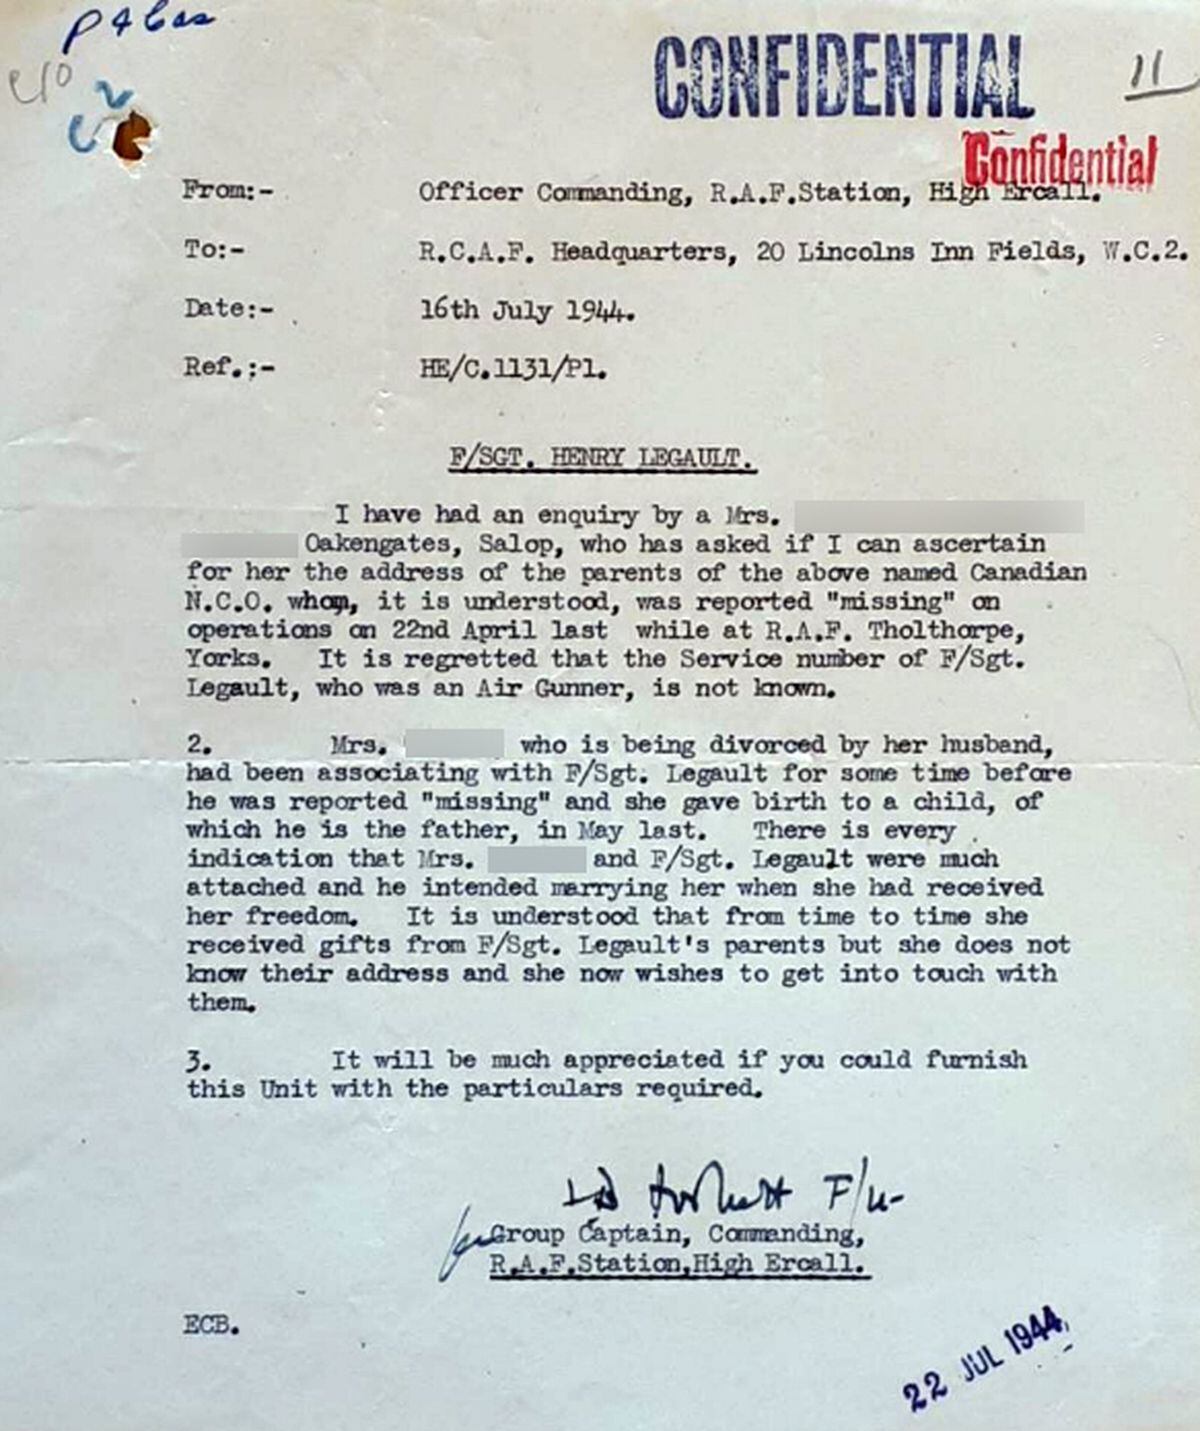 A letter from the commanding officer of RAF High Ercall seeking help in putting Henri's Shropshire lover in touch with his family in Canada. We have obscured her name and exact address.